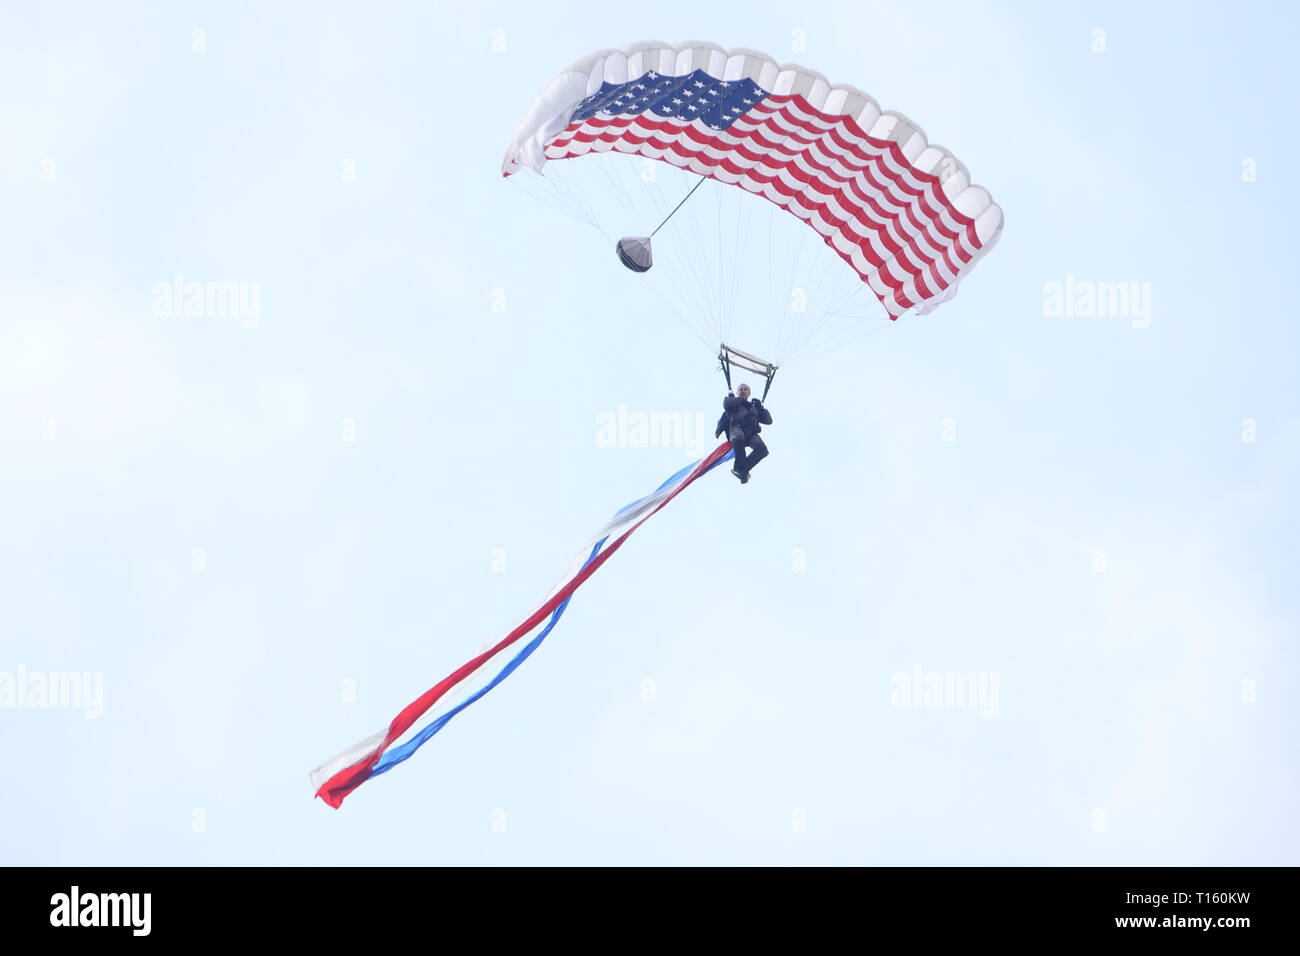 California, USA. 23rd Mar, 2019. 23rd March, 2019   Salinas, California, USA      Scenes from the annual  Salinas Air-Show, featuring the US Navy 'Blue Angels' arobatic team:  Here the parachute opening drop with accompanying USA flag Credit: Motofoto/Alamy Live News Stock Photo